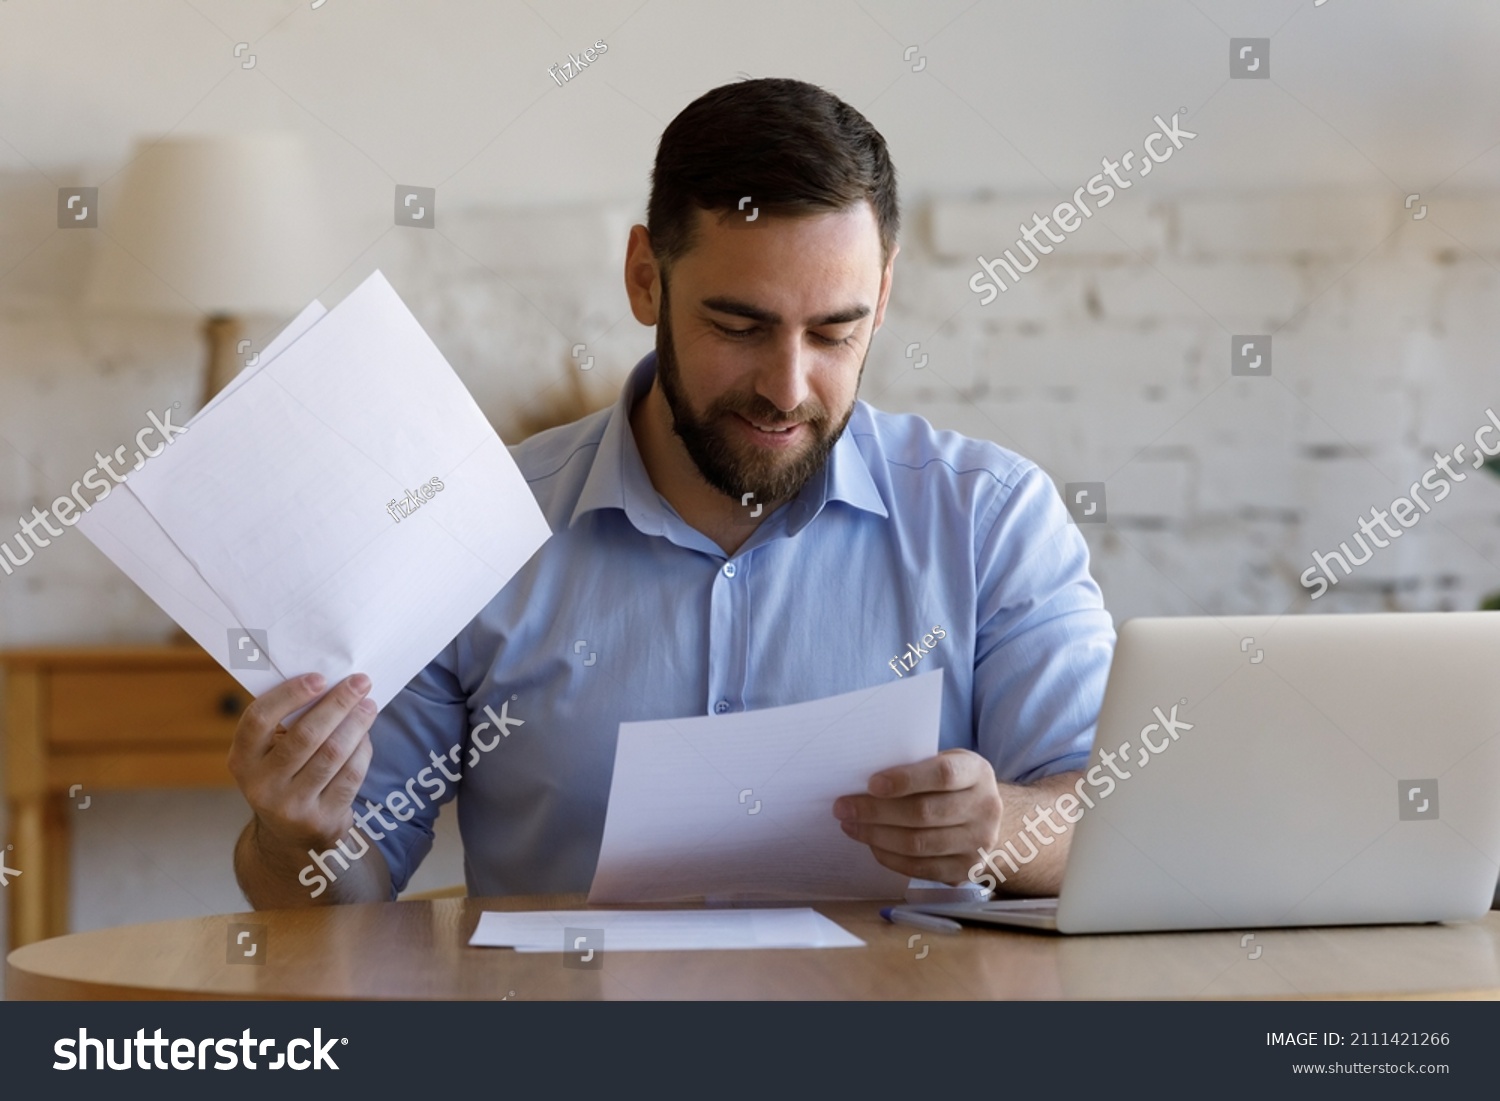 Satisfied smiling business man doing paperwork at home workplace. Entrepreneur reading financial reports, reading documents. Tenant making payment for rent, reviewing bills, bank mortgage notice #2111421266